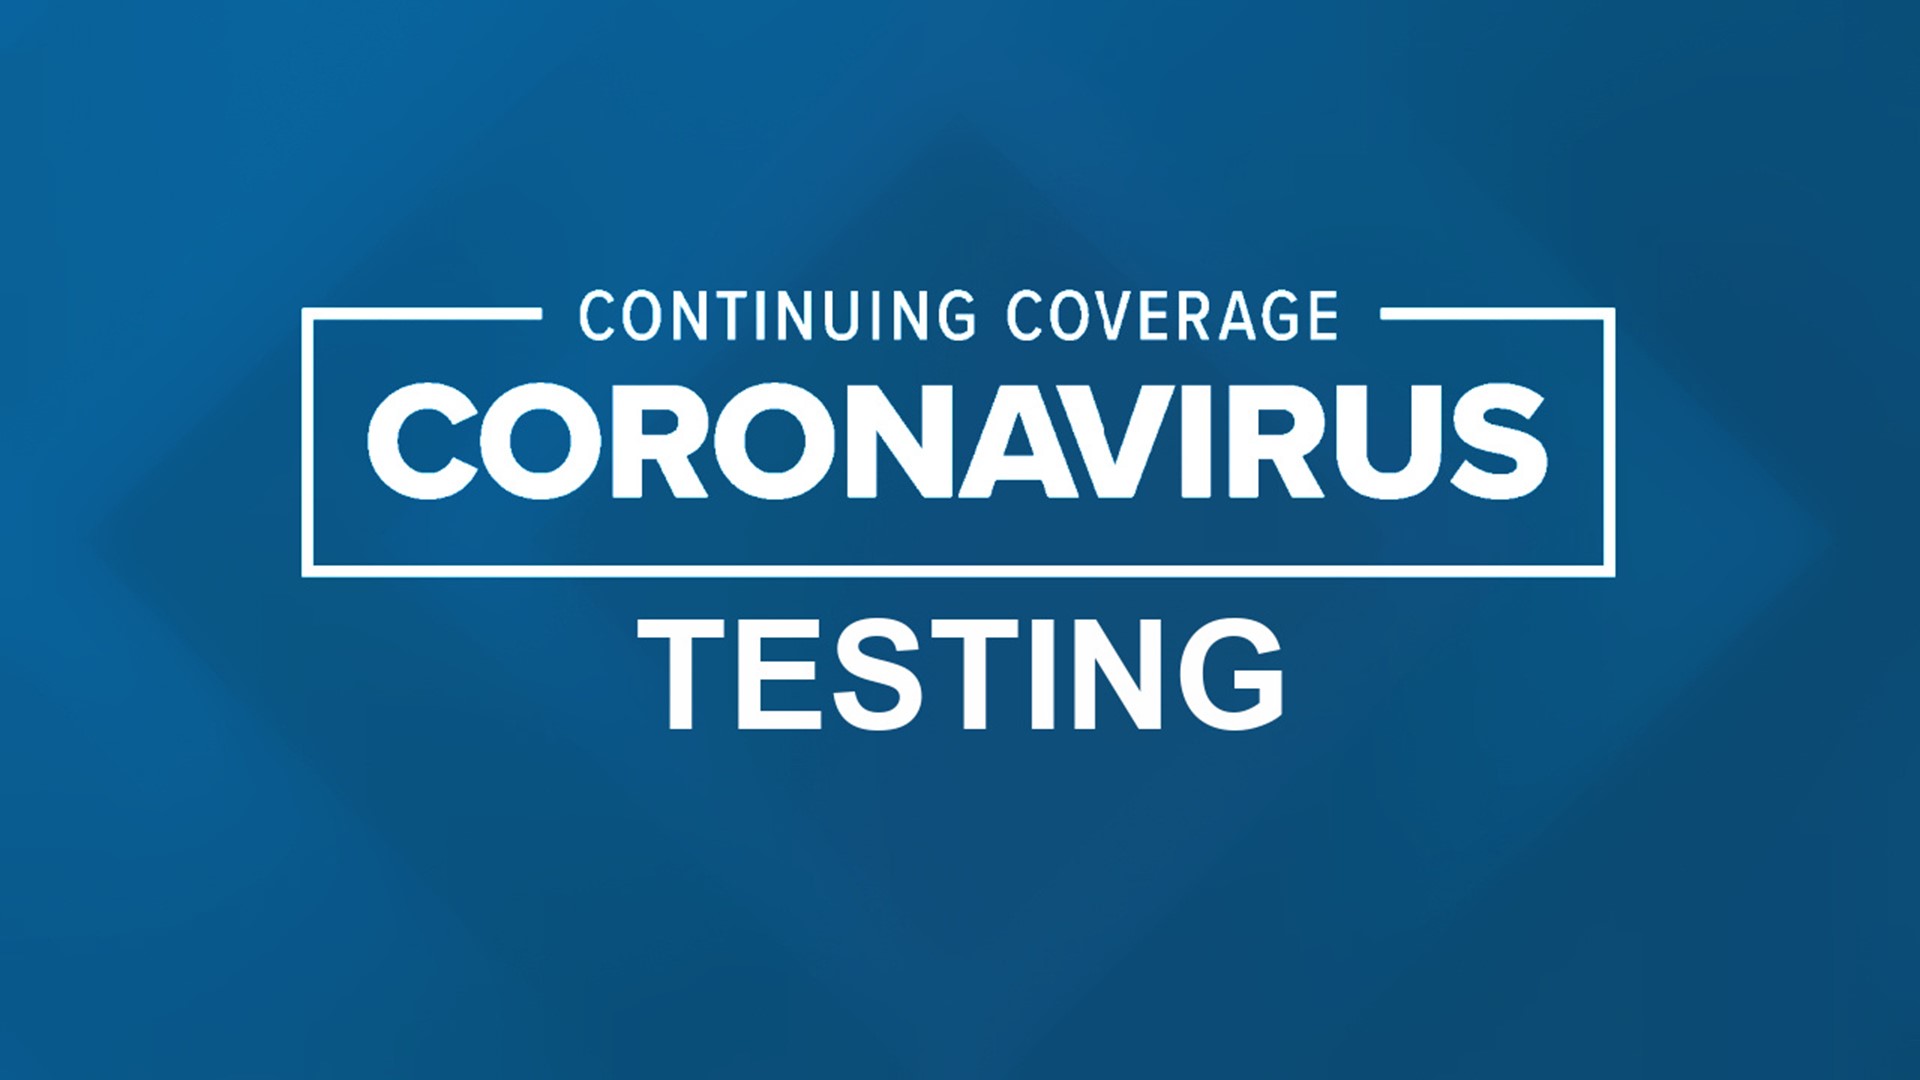 As people get ready to spend the holiday with family, many are getting tested for COVID-19.